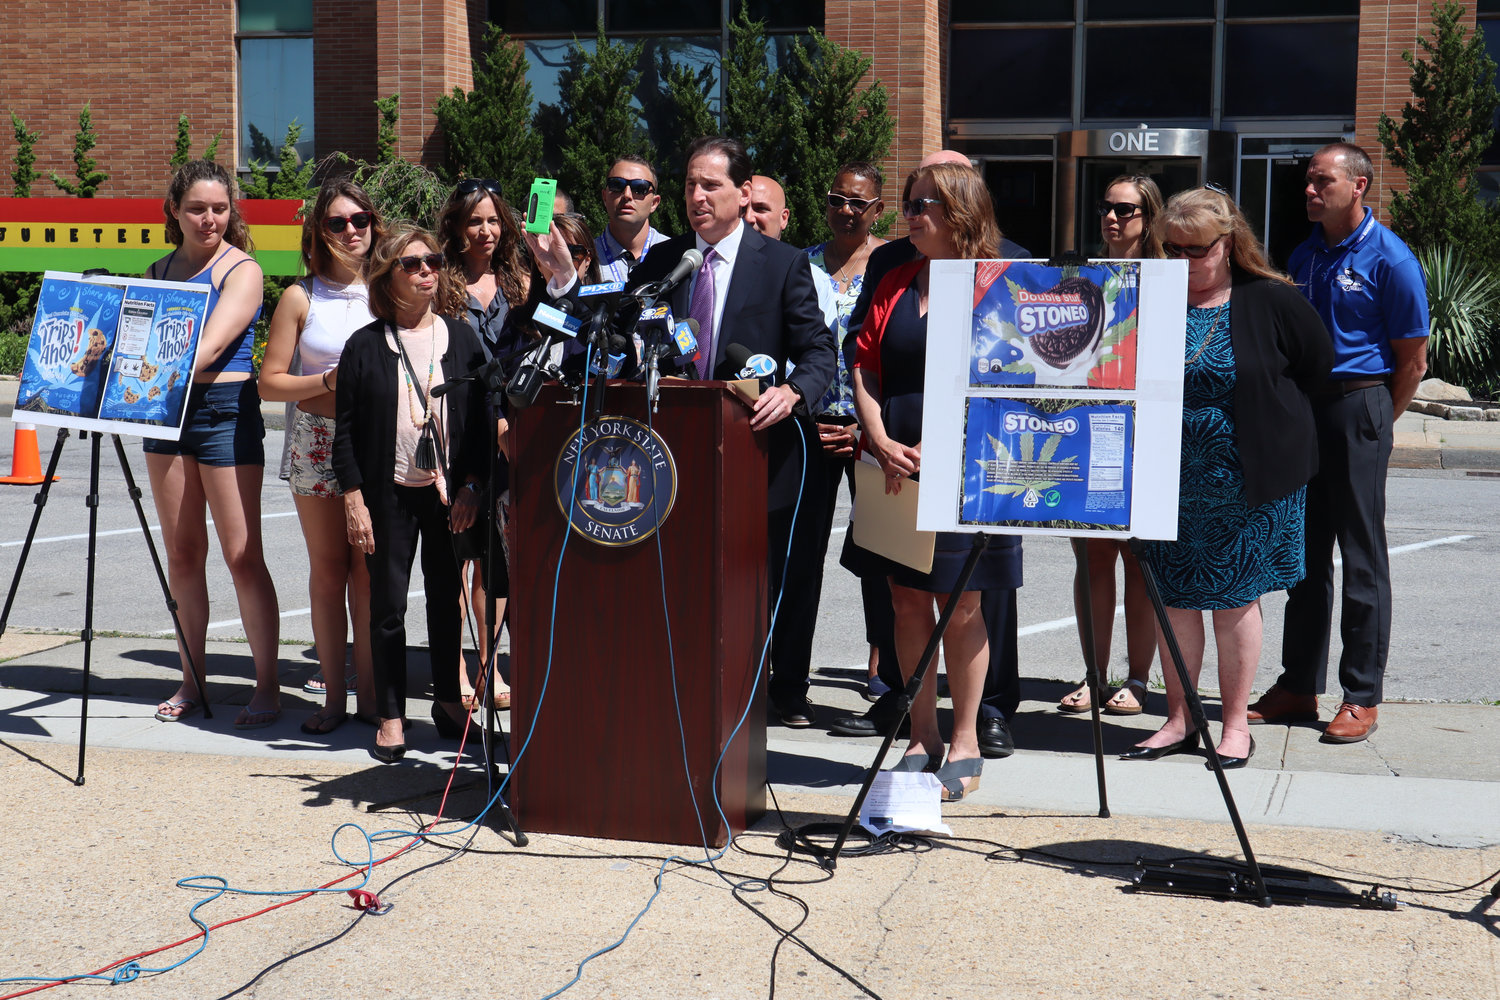 Officials urge the state health department to ban delta-8 after being alerted of packaging that resembles popular cookie brands for kids. Kaminsky displayed a common delta-8 product, which can be purchased at some local convenience stores.